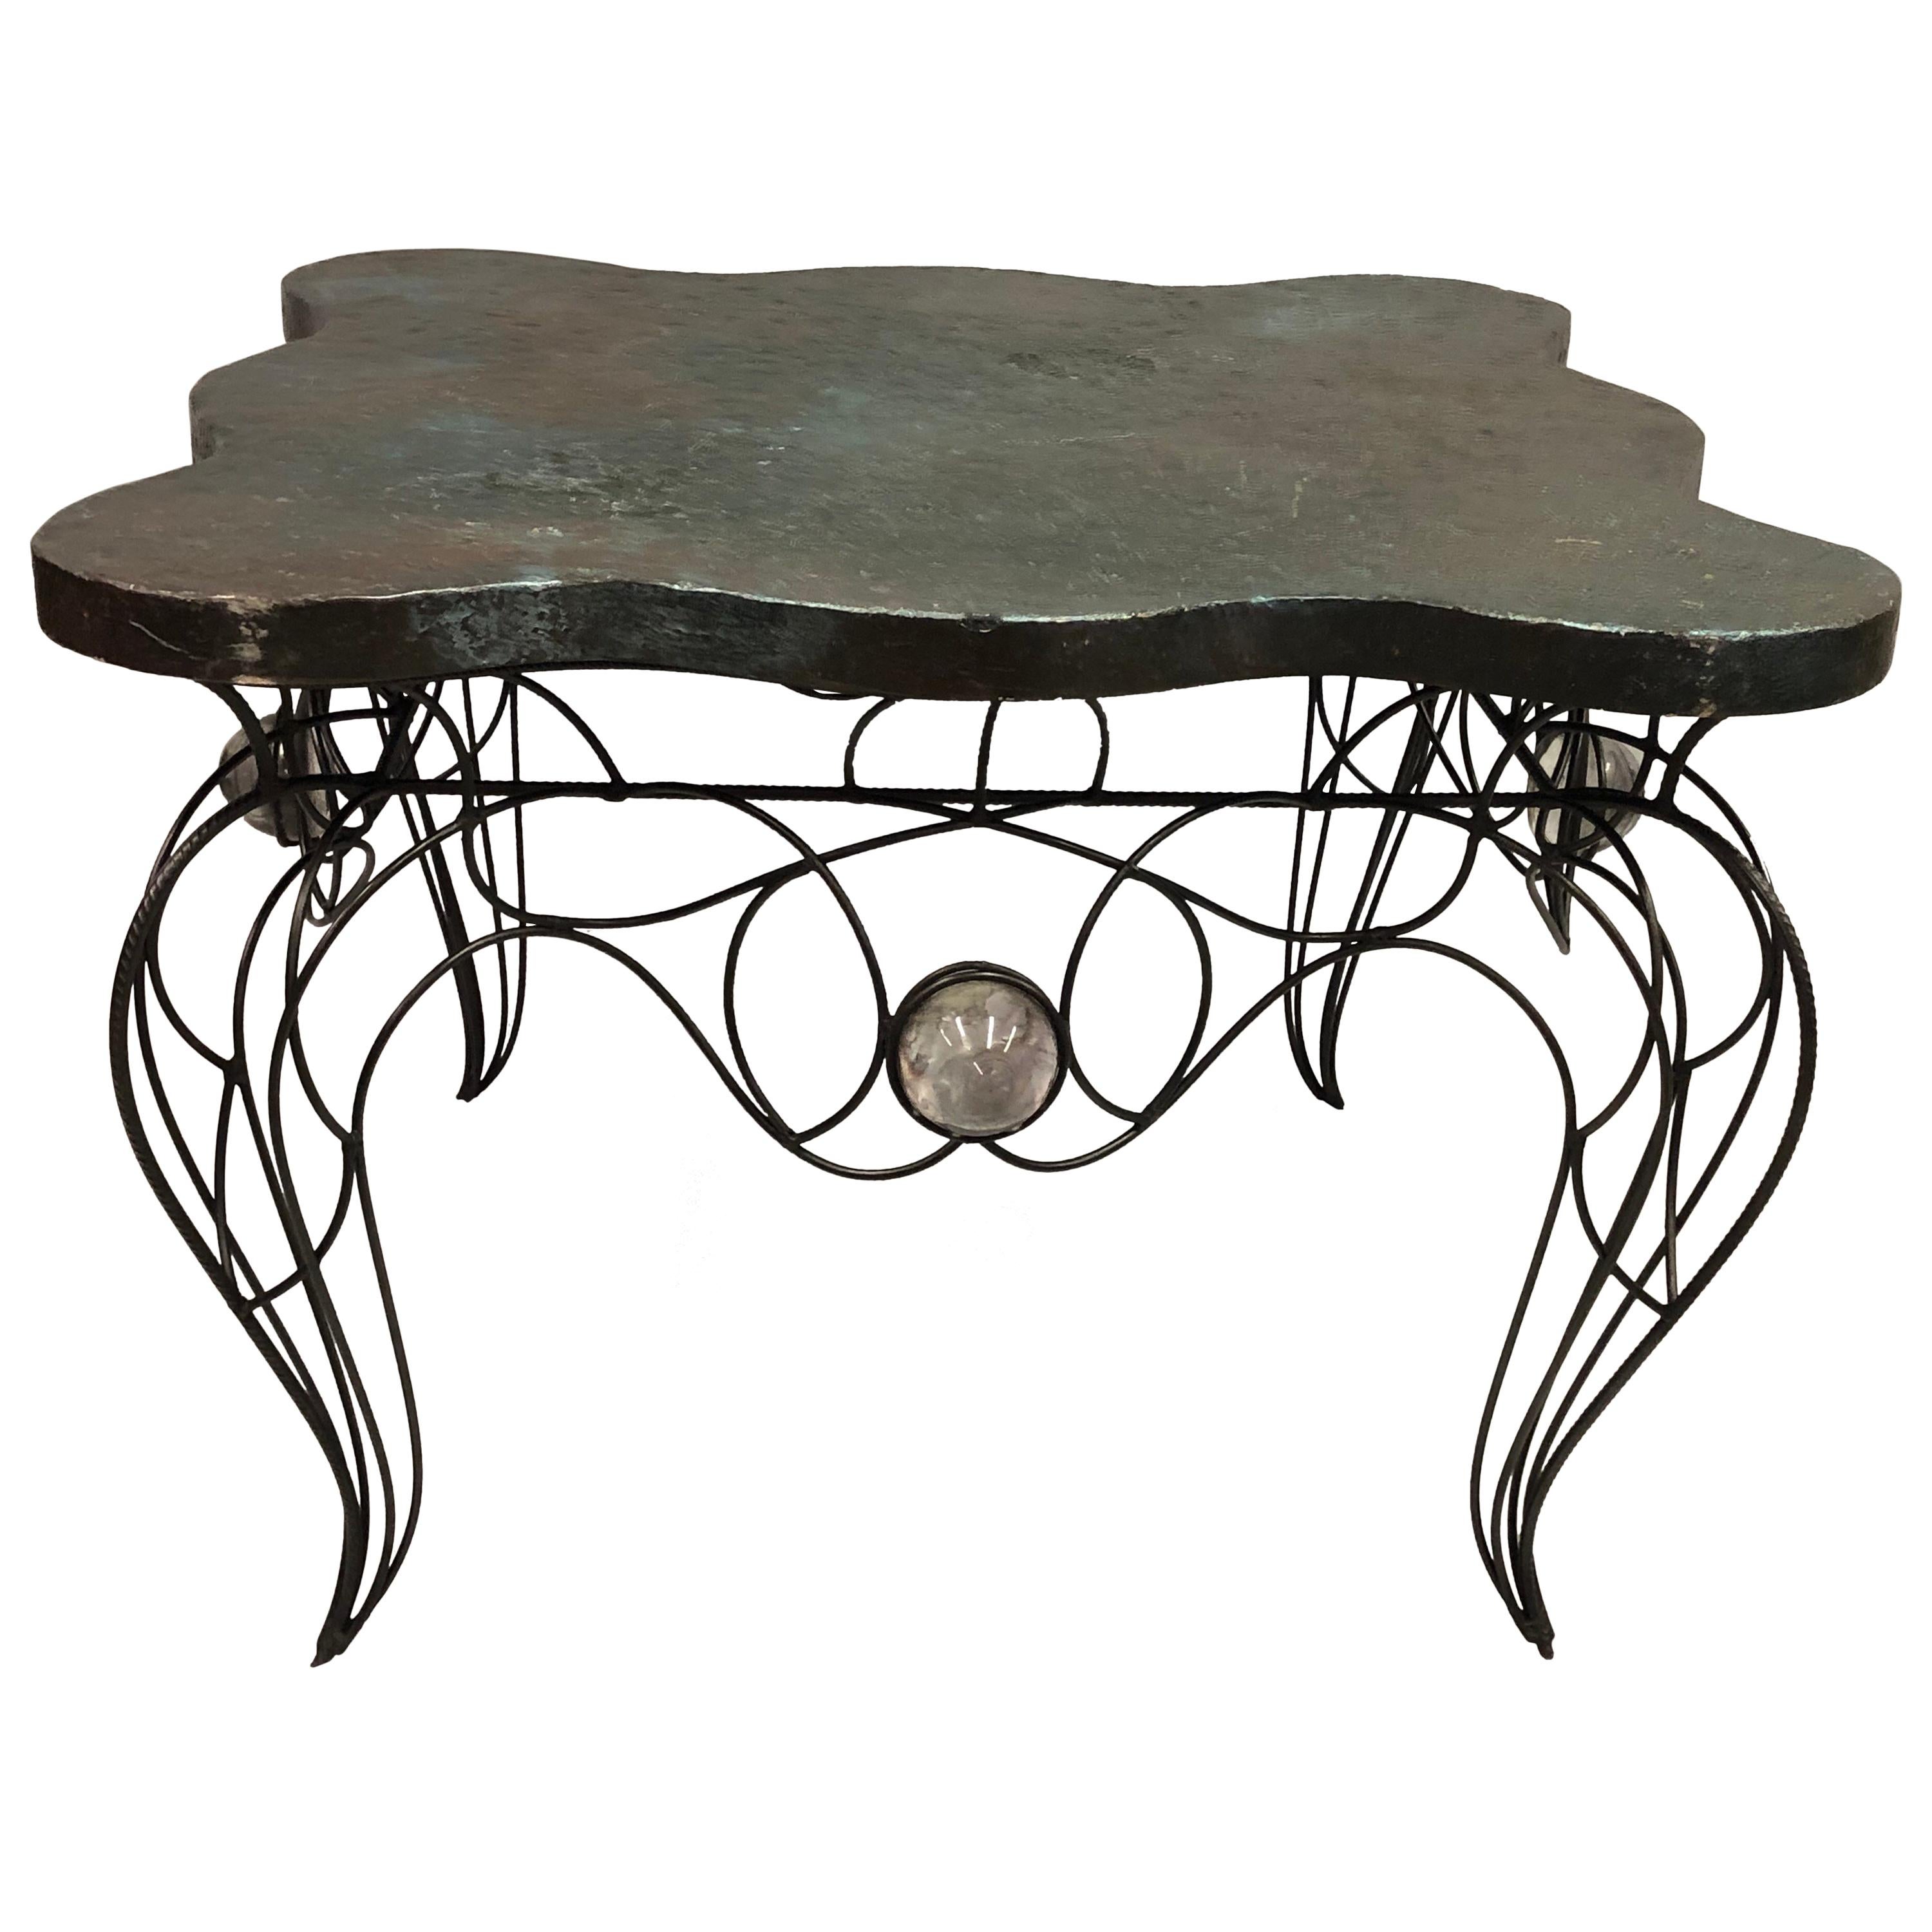 Unique Handwrought Iron & Crystal Center or Dining Table by Andre Dubreuil, 1986 For Sale